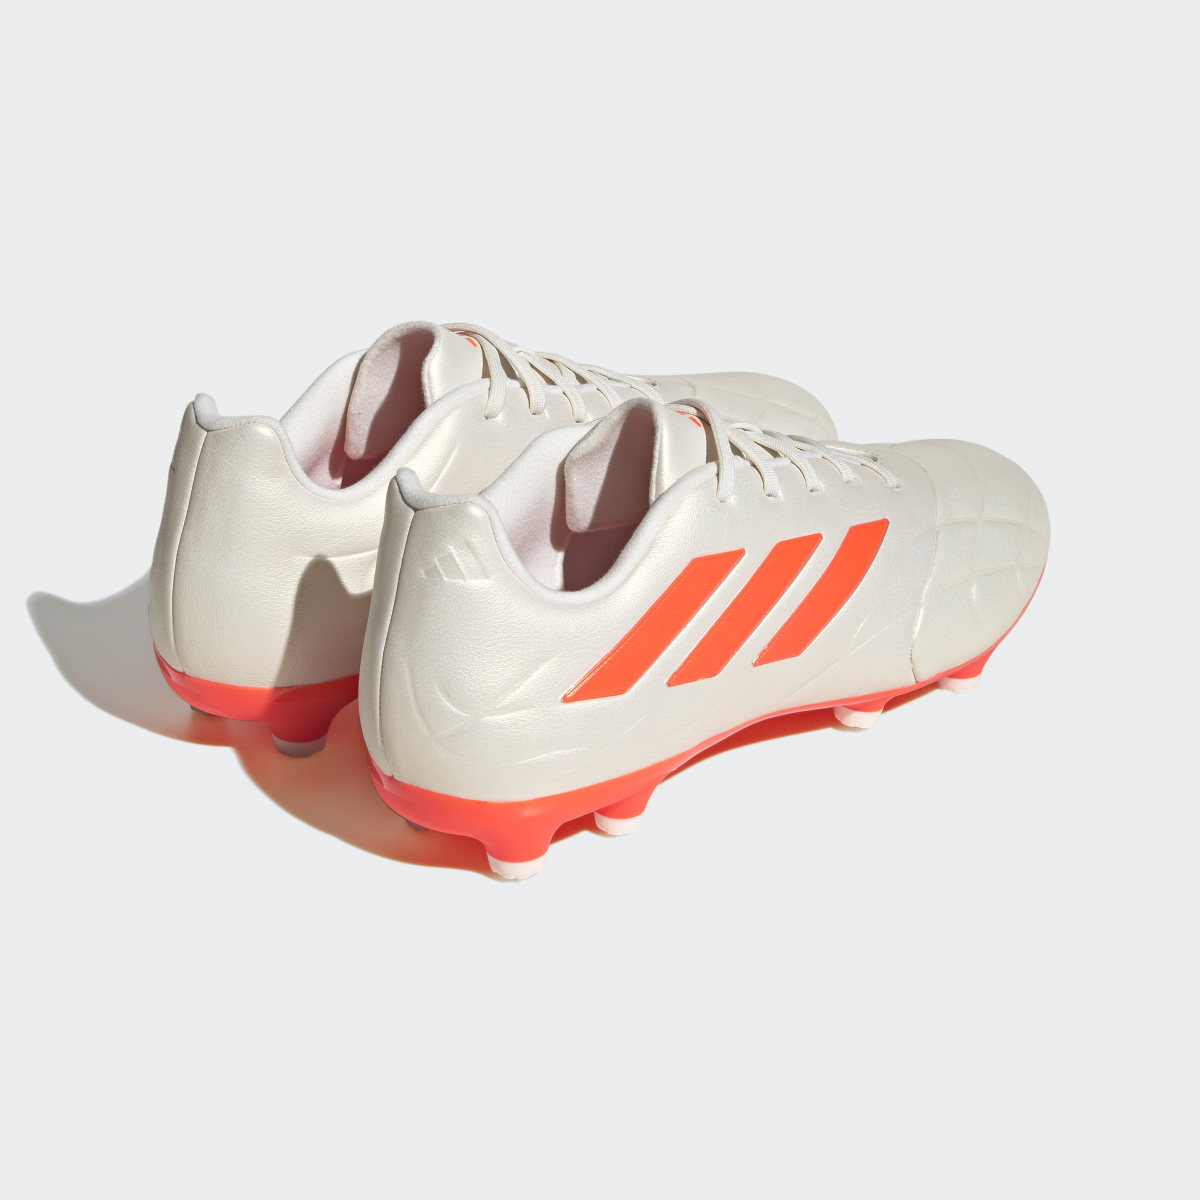 Adidas Copa Pure.3 Firm Ground Boots. 6